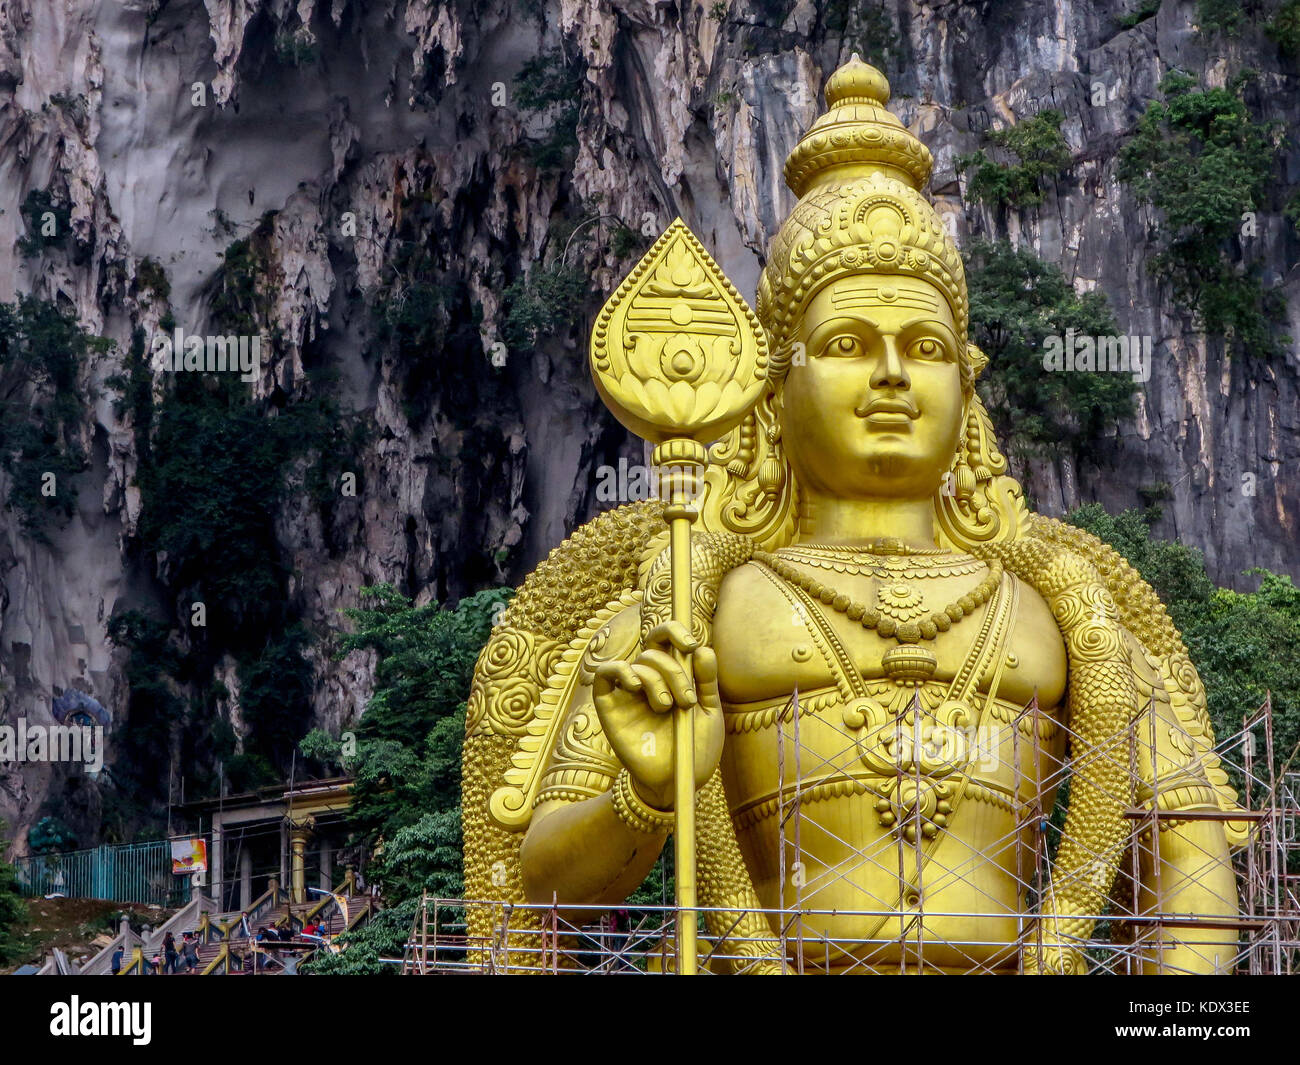 The world's second tallest statue of Lord Murugan, the Hindu God ...